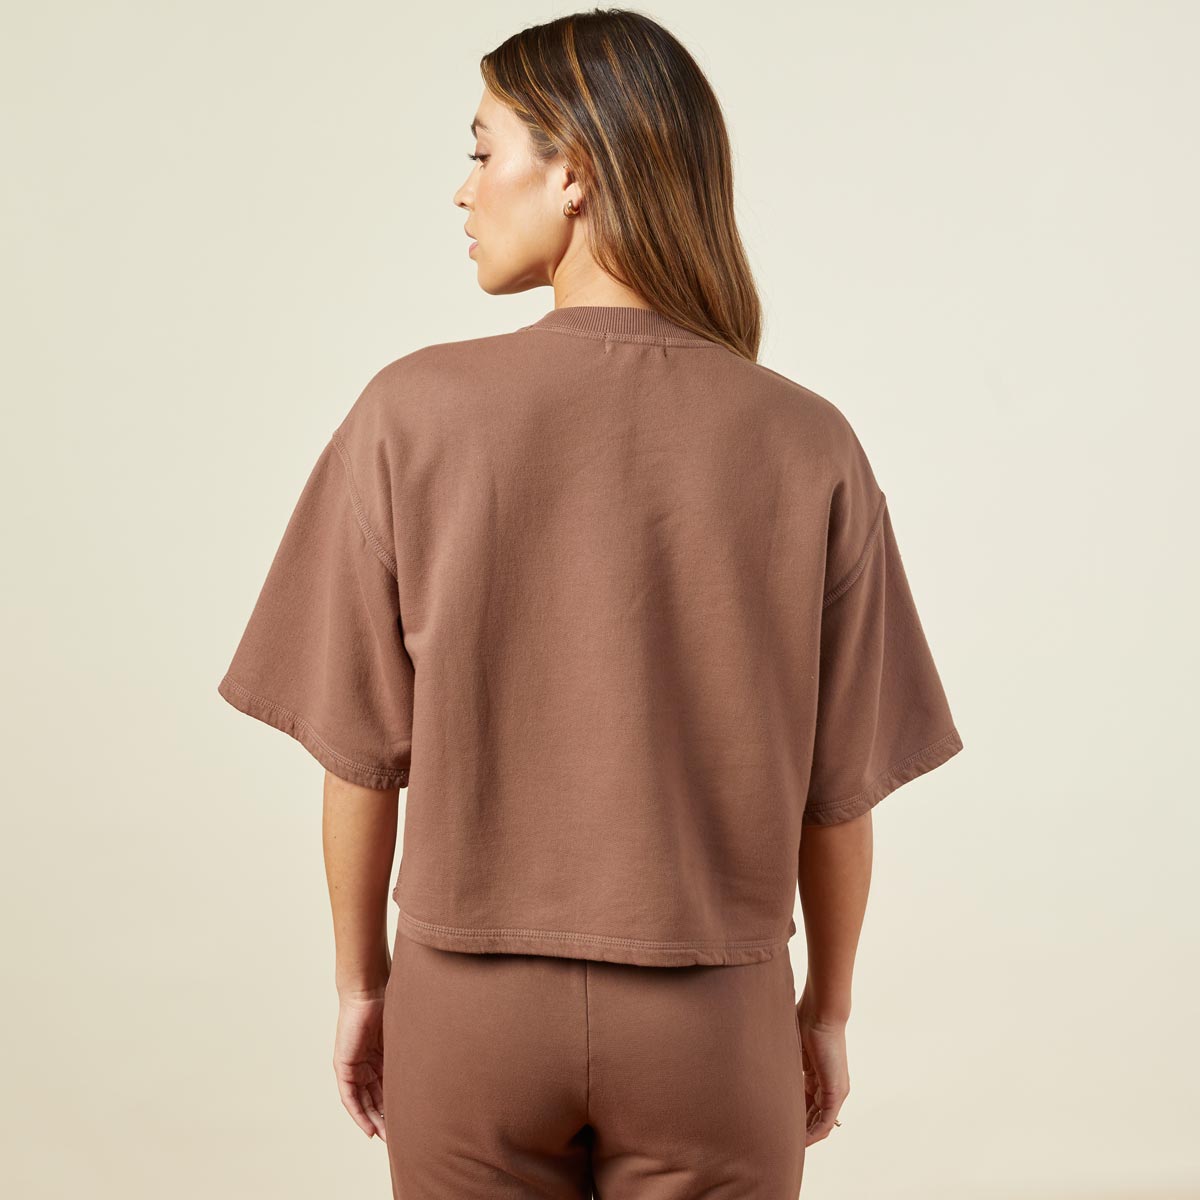 Back view of model wearing the 90's classic sweatshirt tee in dusty cocoa.